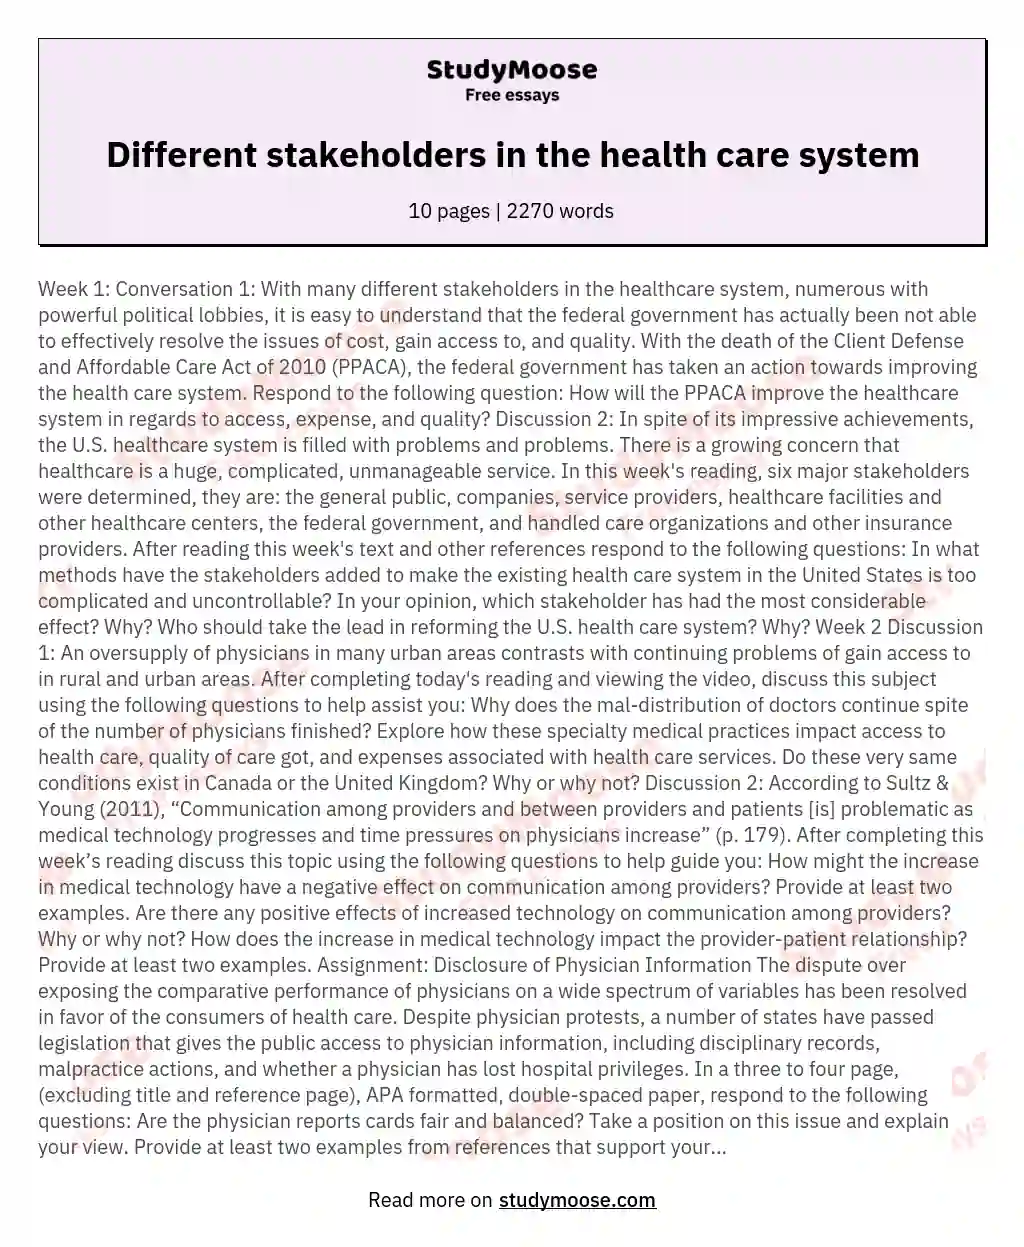 Different stakeholders in the health care system essay